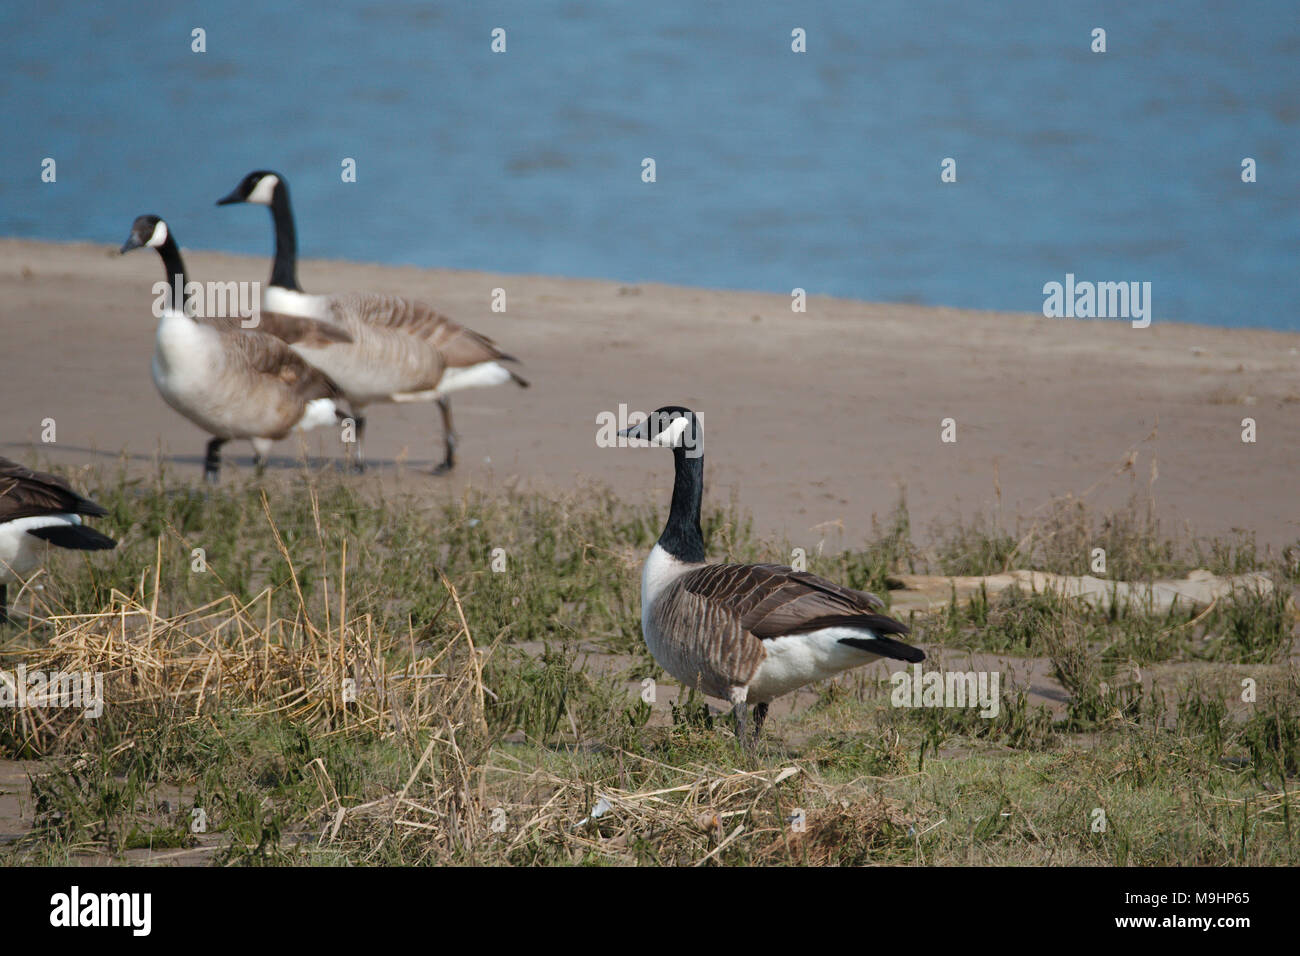 A Canadian goose beside a river estuary which is part of a flock that can be seen in the background. Stock Photo